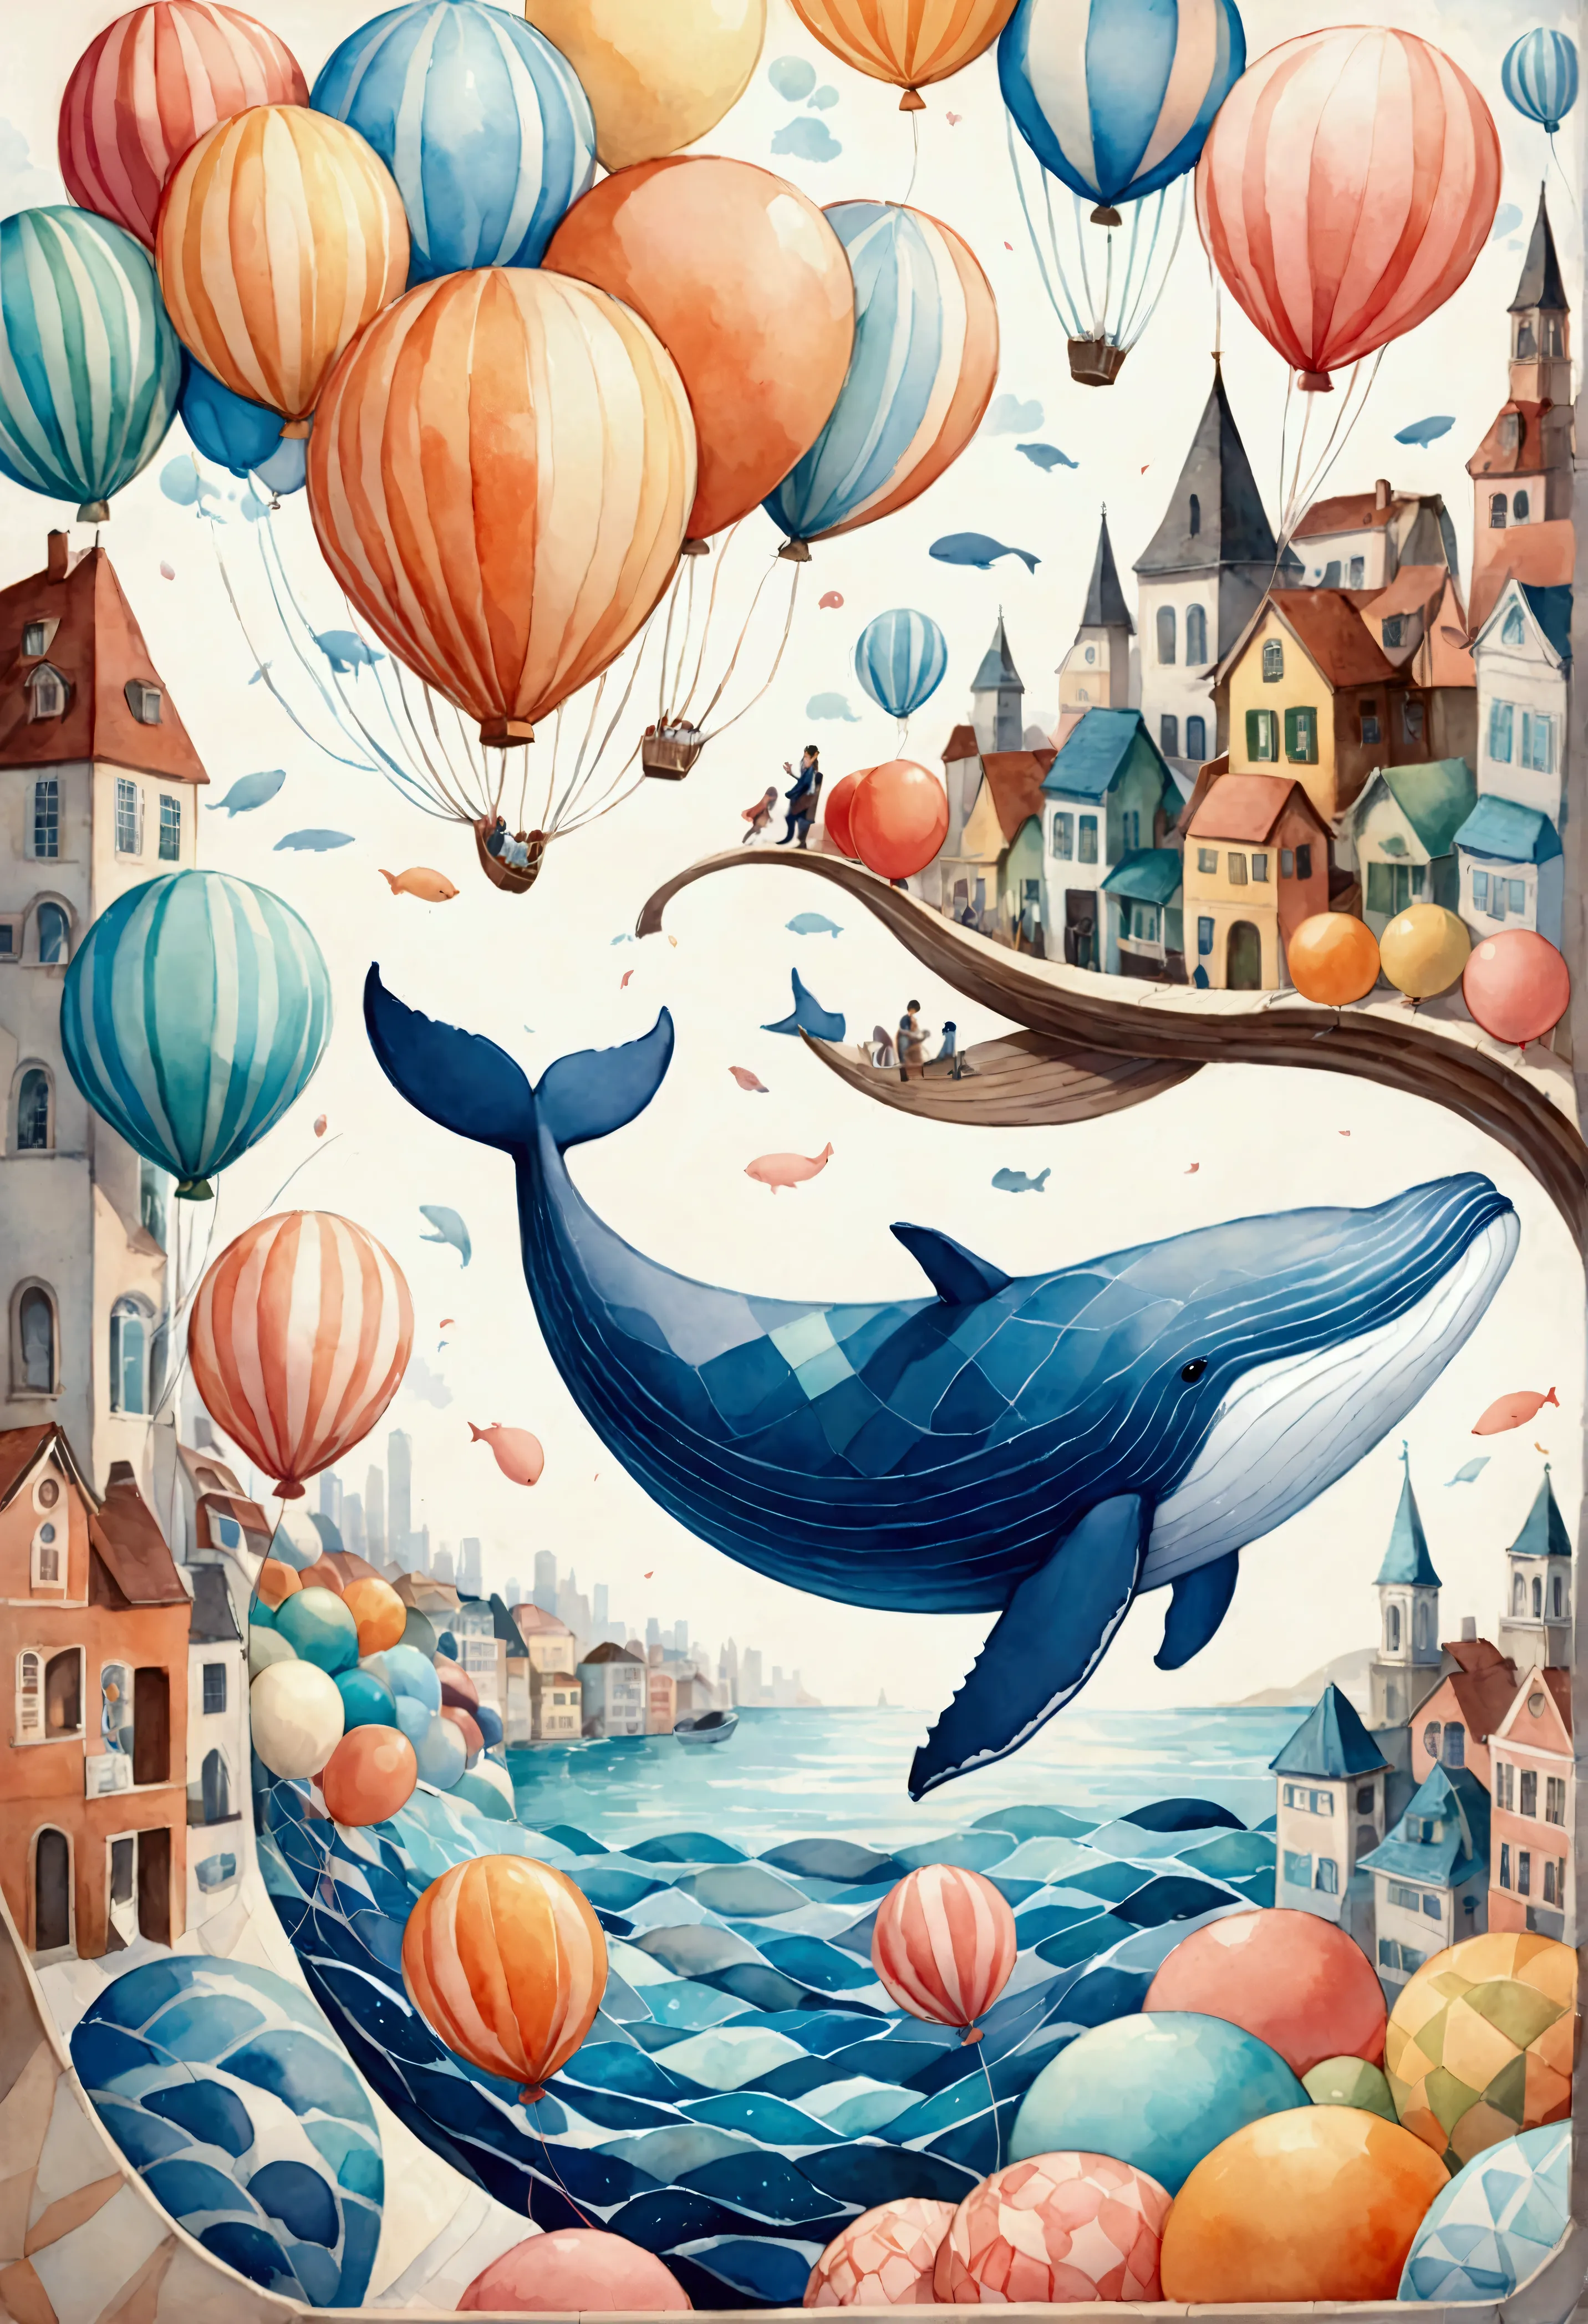 create artistic handmade pieces,This is a dreamy and colorful work that looks like an illustration in a picture book.,Collage us...